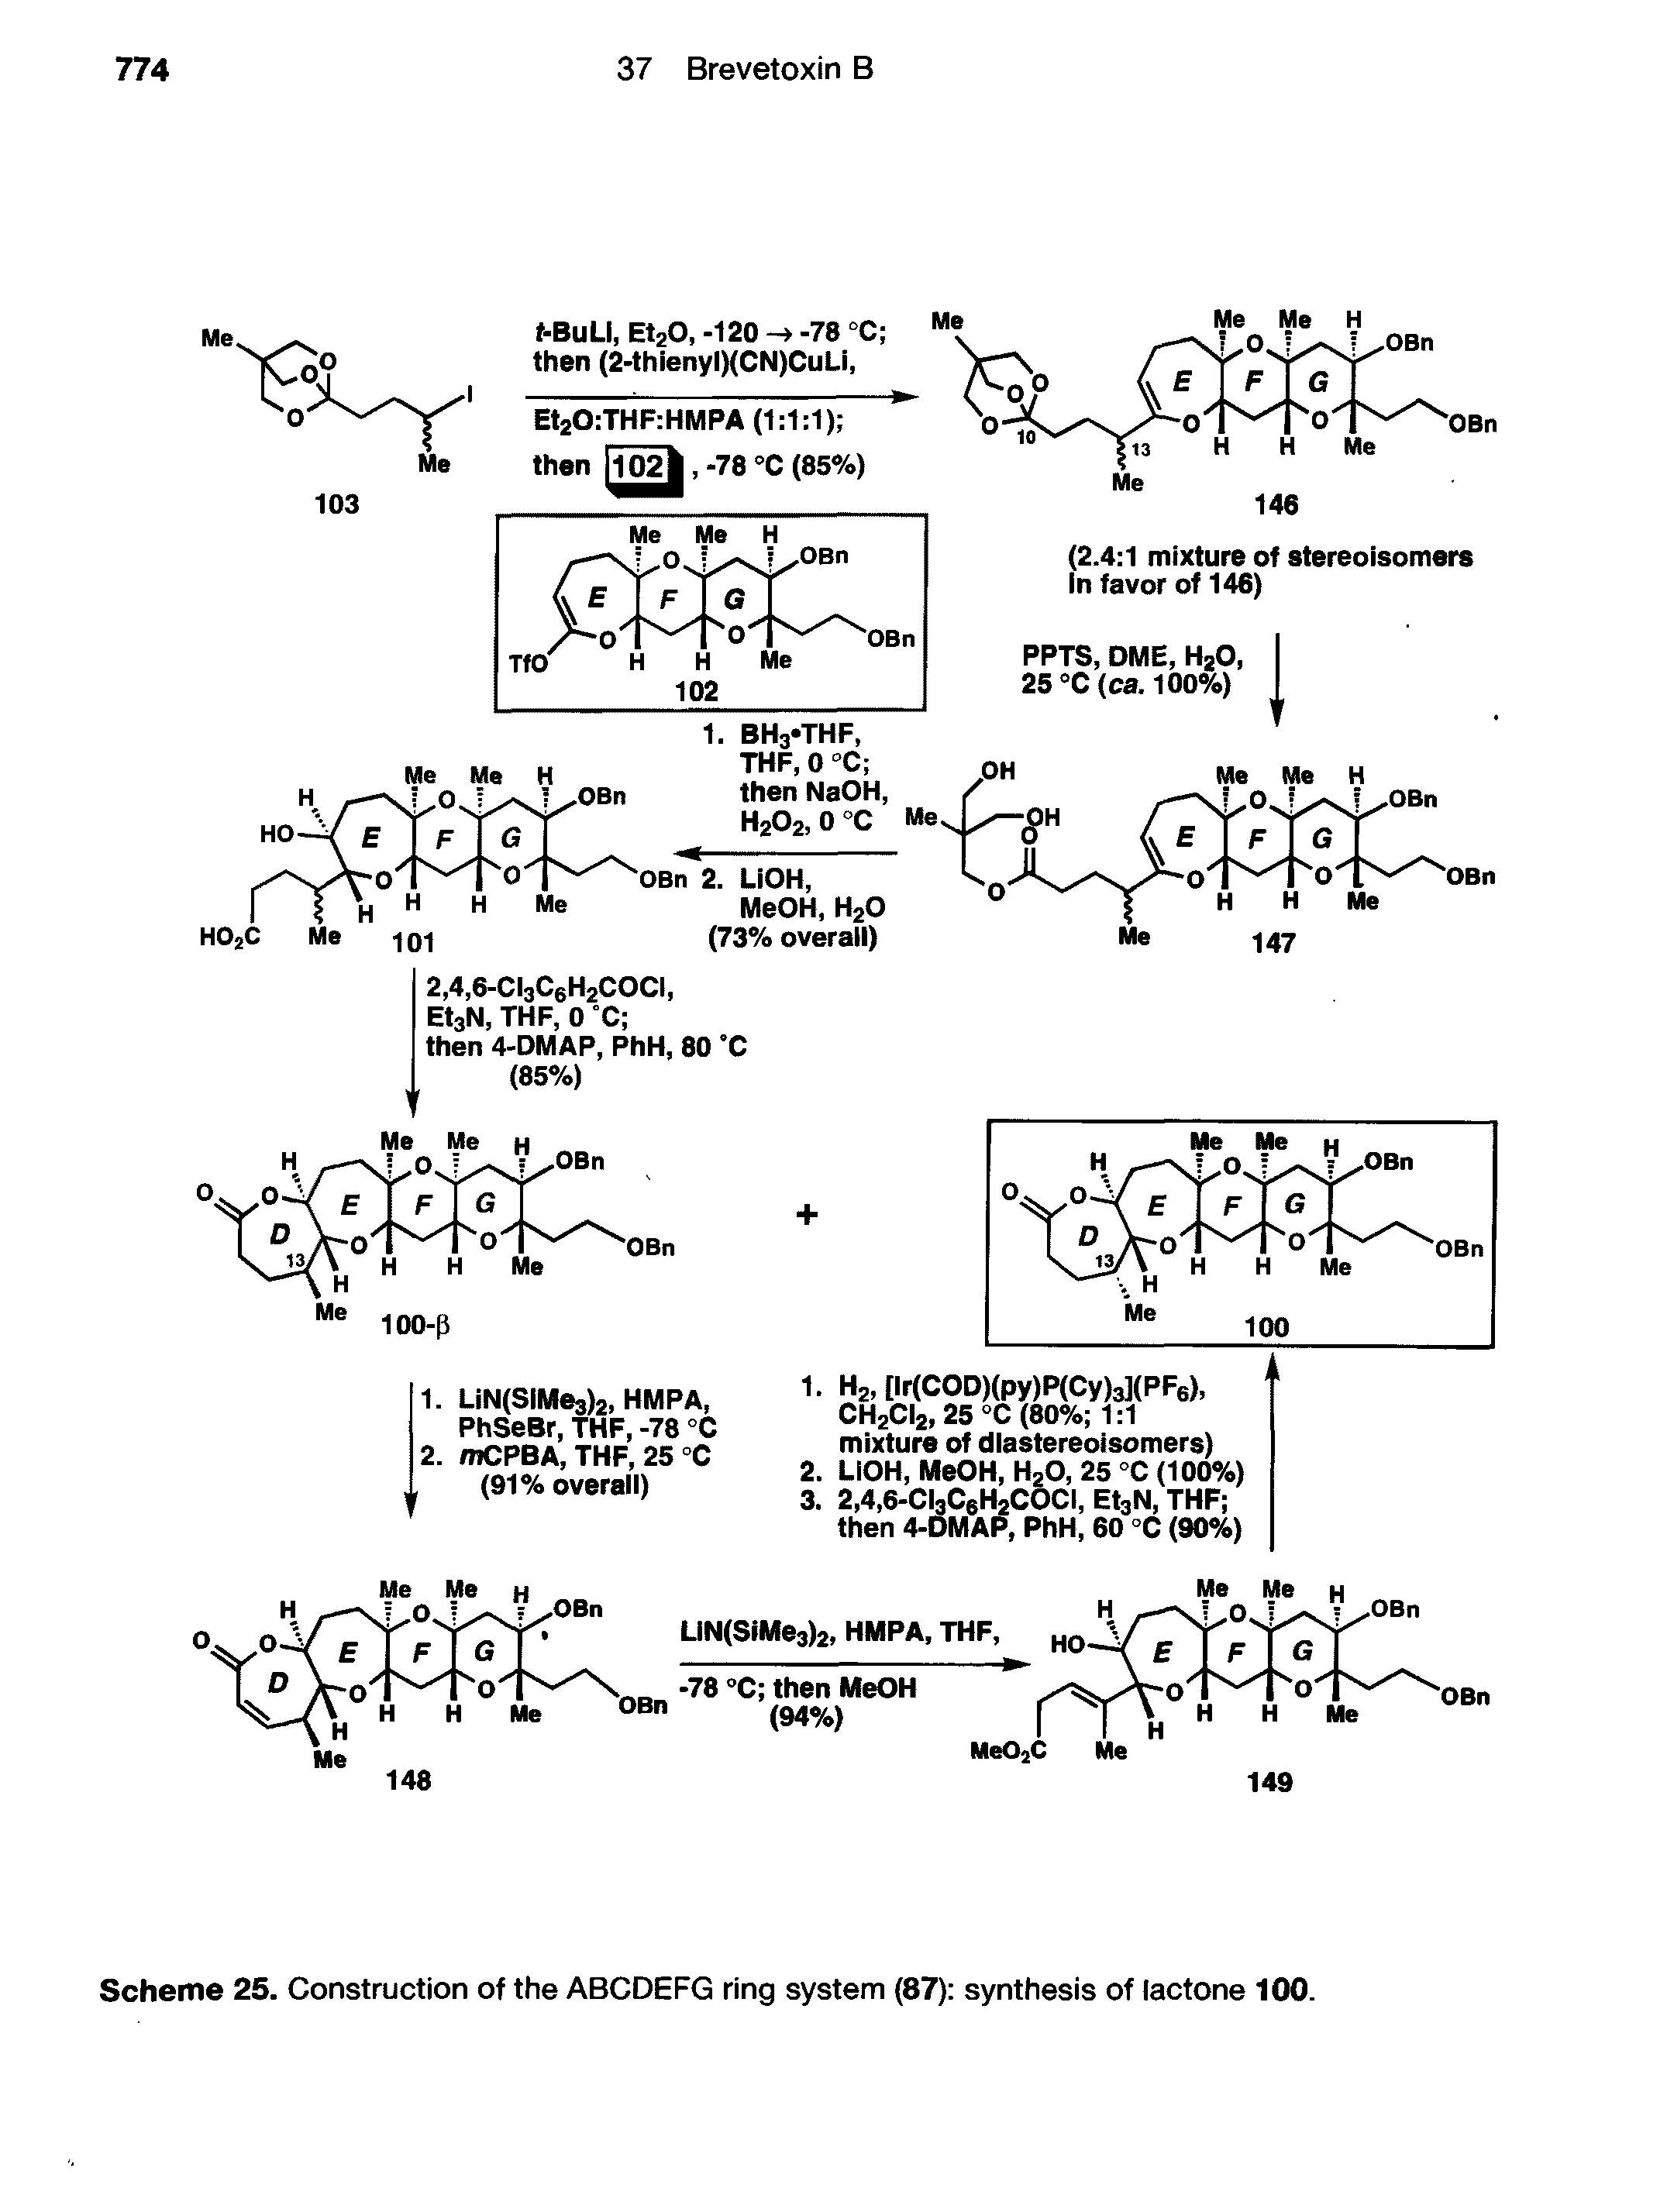 Scheme 25. Construction of the ABCDEFG ring system (87) synthesis of lactone 100.